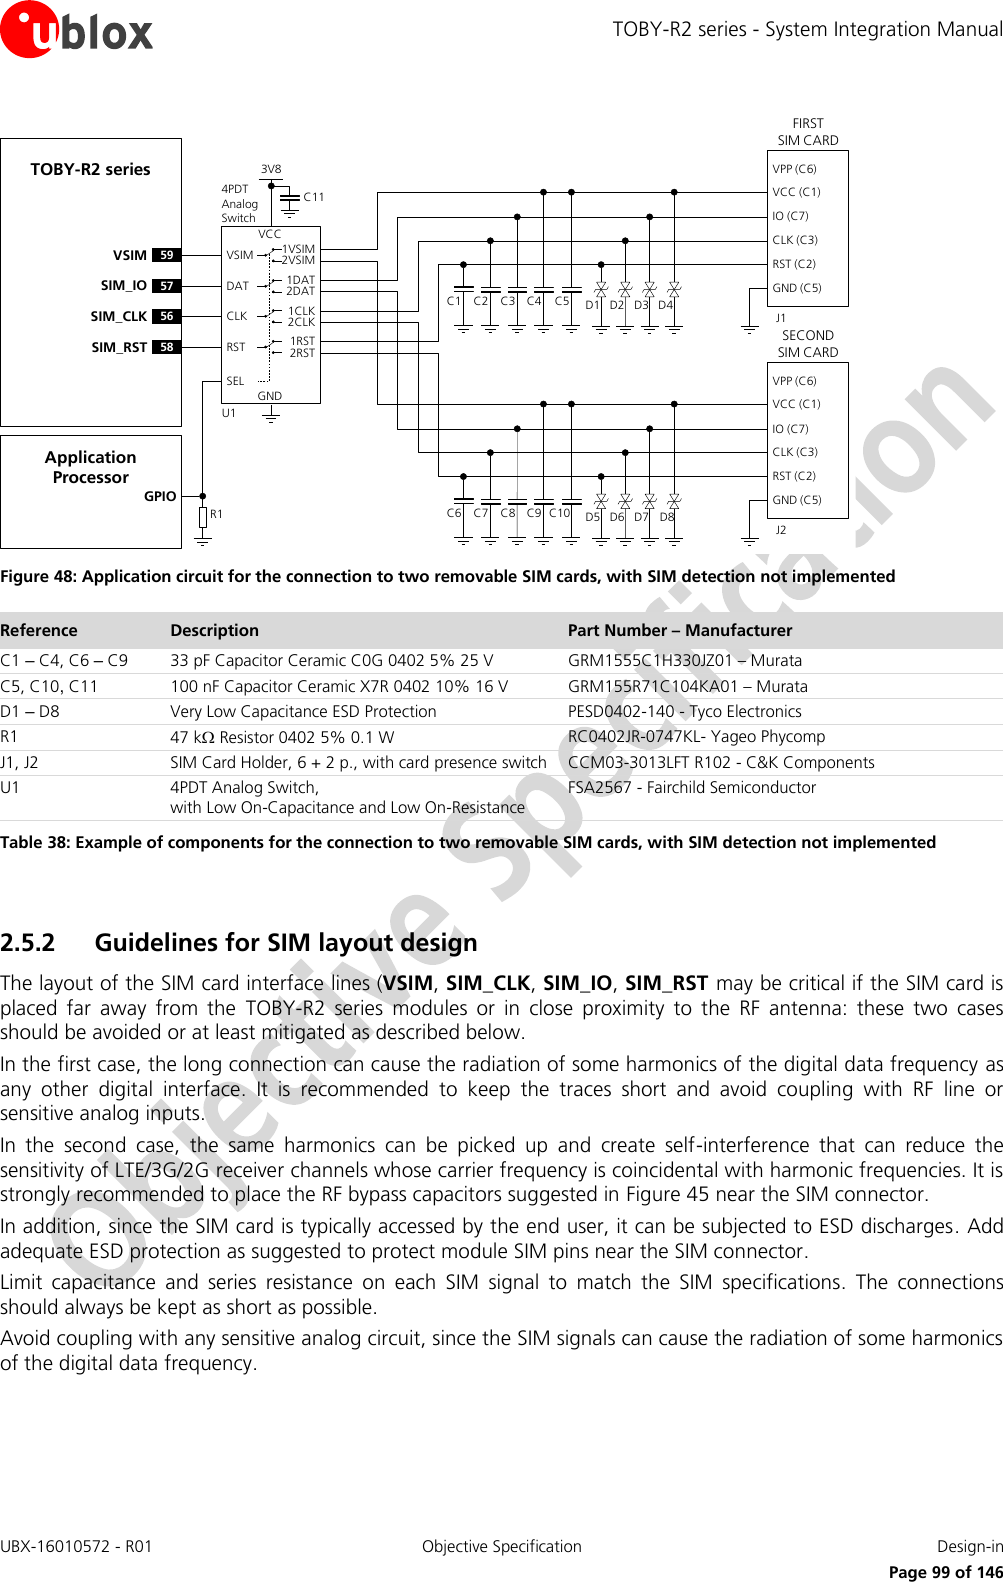 TOBY-R2 series - System Integration Manual UBX-16010572 - R01  Objective Specification  Design-in     Page 99 of 146 TOBY-R2 seriesC1FIRST             SIM CARDVPP (C6)VCC (C1)IO (C7)CLK (C3)RST (C2)GND (C5)C2 C3 C5J1C4 D1 D2 D3 D4GNDU159VSIM VSIM 1VSIM2VSIMVCCC114PDT Analog Switch3V857SIM_IO DAT 1DAT2DAT56SIM_CLK CLK 1CLK2CLK58SIM_RST RST 1RST2RSTSELSECOND   SIM CARDVPP (C6)VCC (C1)IO (C7)CLK (C3)RST (C2)GND (C5)J2C6 C7 C8 C10C9 D5 D6 D7 D8Application ProcessorGPIOR1 Figure 48: Application circuit for the connection to two removable SIM cards, with SIM detection not implemented Reference Description Part Number – Manufacturer C1 – C4, C6 – C9 33 pF Capacitor Ceramic C0G 0402 5% 25 V GRM1555C1H330JZ01 – Murata C5, C10, C11 100 nF Capacitor Ceramic X7R 0402 10% 16 V GRM155R71C104KA01 – Murata D1 – D8 Very Low Capacitance ESD Protection PESD0402-140 - Tyco Electronics  R1 47 k Resistor 0402 5% 0.1 W RC0402JR-0747KL- Yageo Phycomp J1, J2 SIM Card Holder, 6 + 2 p., with card presence switch CCM03-3013LFT R102 - C&amp;K Components U1 4PDT Analog Switch,  with Low On-Capacitance and Low On-Resistance FSA2567 - Fairchild Semiconductor Table 38: Example of components for the connection to two removable SIM cards, with SIM detection not implemented  2.5.2 Guidelines for SIM layout design The layout of the SIM card interface lines (VSIM, SIM_CLK, SIM_IO, SIM_RST may be critical if the SIM card is placed  far  away  from  the  TOBY-R2  series  modules  or  in  close  proximity  to  the  RF  antenna:  these  two  cases should be avoided or at least mitigated as described below.  In the first case, the long connection can cause the radiation of some harmonics of the digital data frequency as any  other  digital  interface.  It  is  recommended  to  keep  the  traces  short  and  avoid  coupling  with  RF  line  or sensitive analog inputs. In  the  second  case,  the  same  harmonics  can  be  picked  up  and  create  self-interference  that  can  reduce  the sensitivity of LTE/3G/2G receiver channels whose carrier frequency is coincidental with harmonic frequencies. It is strongly recommended to place the RF bypass capacitors suggested in Figure 45 near the SIM connector. In addition, since the SIM card is typically accessed by the end user, it can be subjected to ESD discharges. Add adequate ESD protection as suggested to protect module SIM pins near the SIM connector. Limit  capacitance  and  series  resistance  on  each  SIM  signal  to  match  the  SIM  specifications.  The  connections should always be kept as short as possible. Avoid coupling with any sensitive analog circuit, since the SIM signals can cause the radiation of some harmonics of the digital data frequency.  